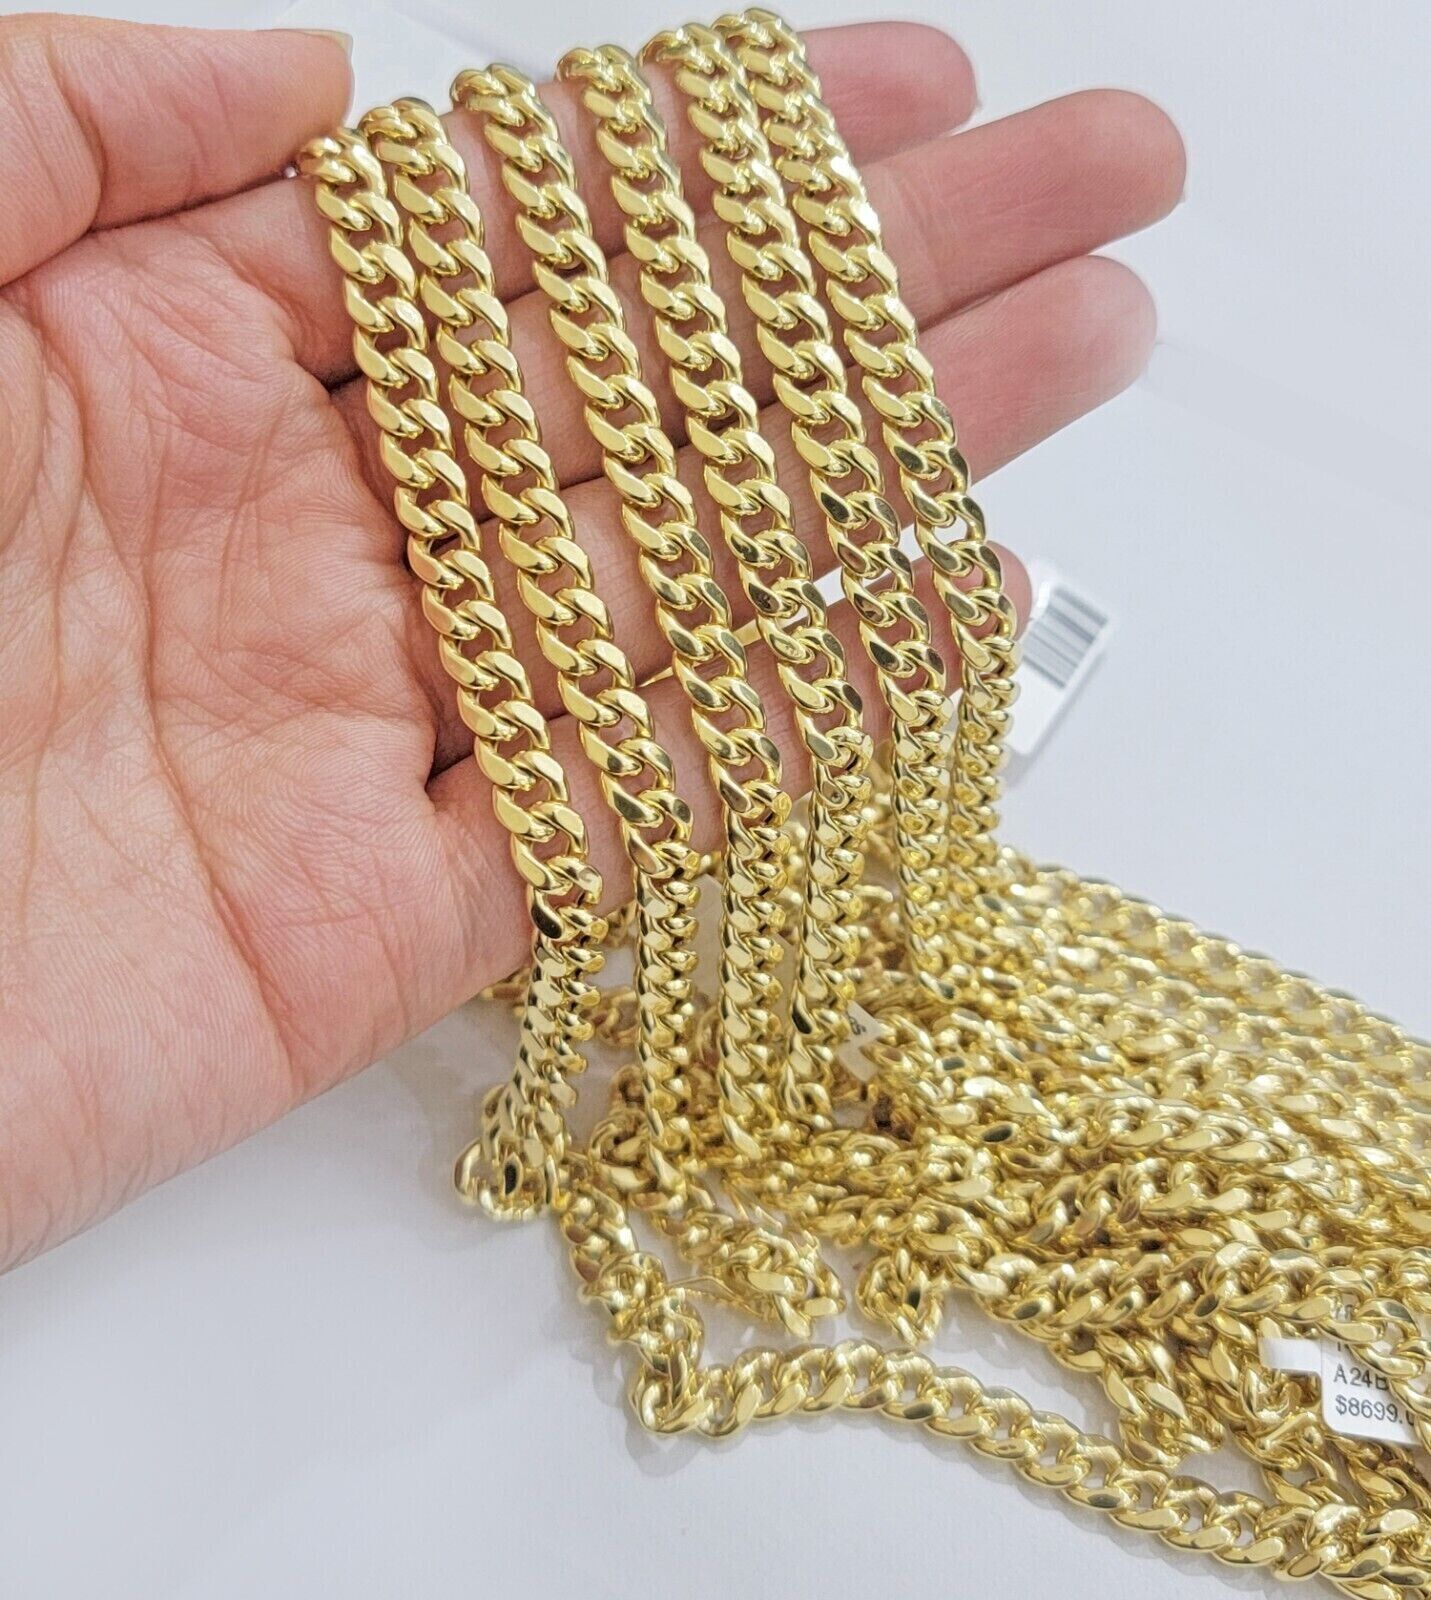 Real 14k Yellow Gold Miami Cuban Link Chain Necklace 4.5-7mm 18-26 Box Lock